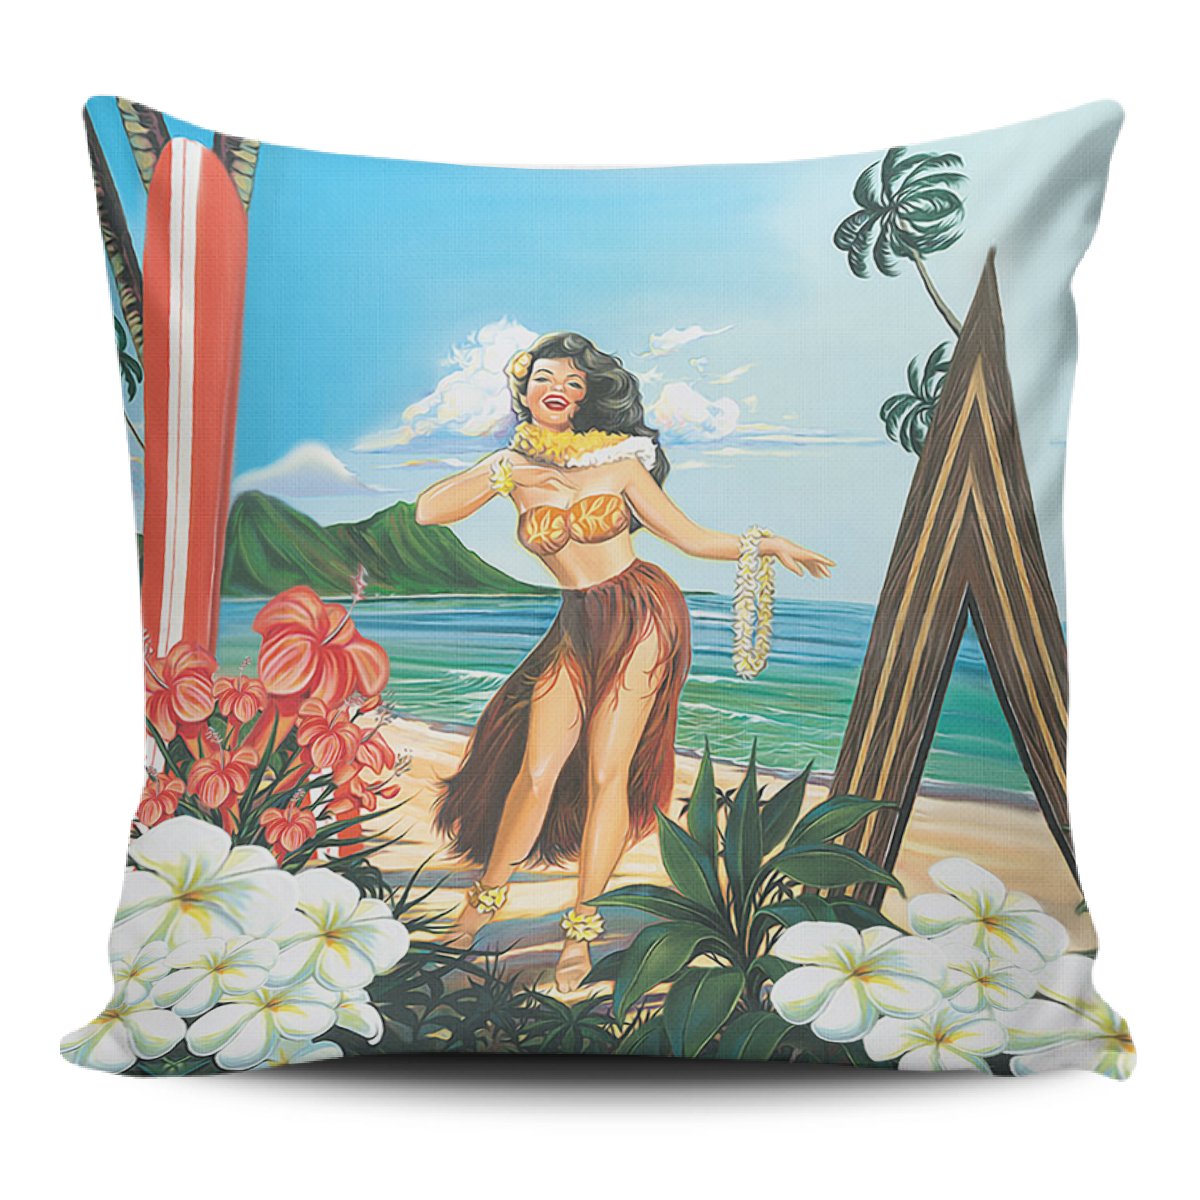 Aloha Hula Dance Pillow Covers One Size Zippered Pillow Case 18"x18"(Twin Sides) Black - Polynesian Pride